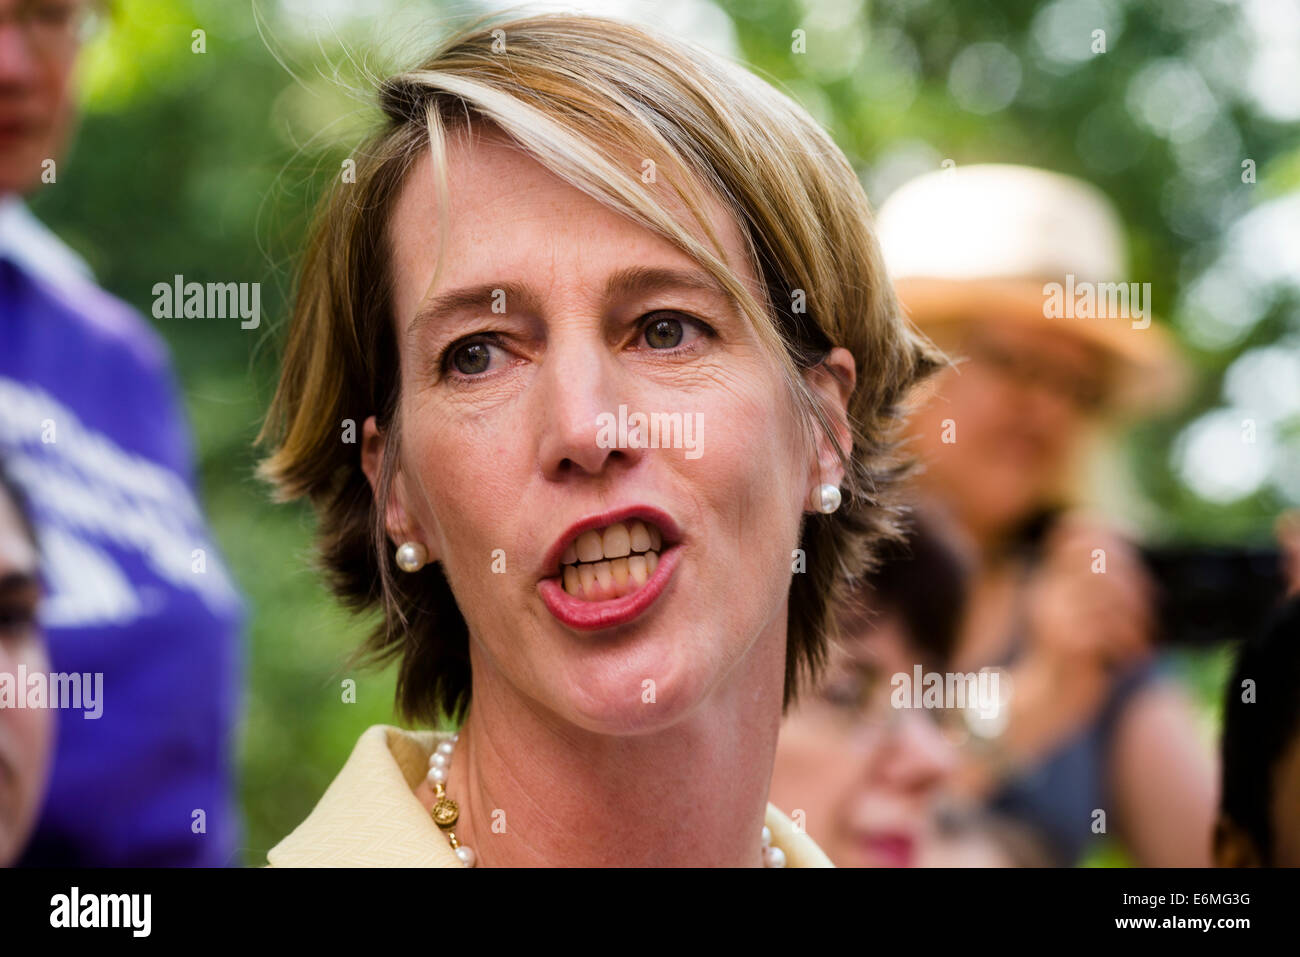 Gubernatorial candidate Zephyr Teachout endorsed by the National Organization of Women ©Stacy Walsh Rosenstock/Alamy Live News - new-york-usa-26th-august-2014-gubernatorial-candidate-zephyr-teachout-E6MG3G